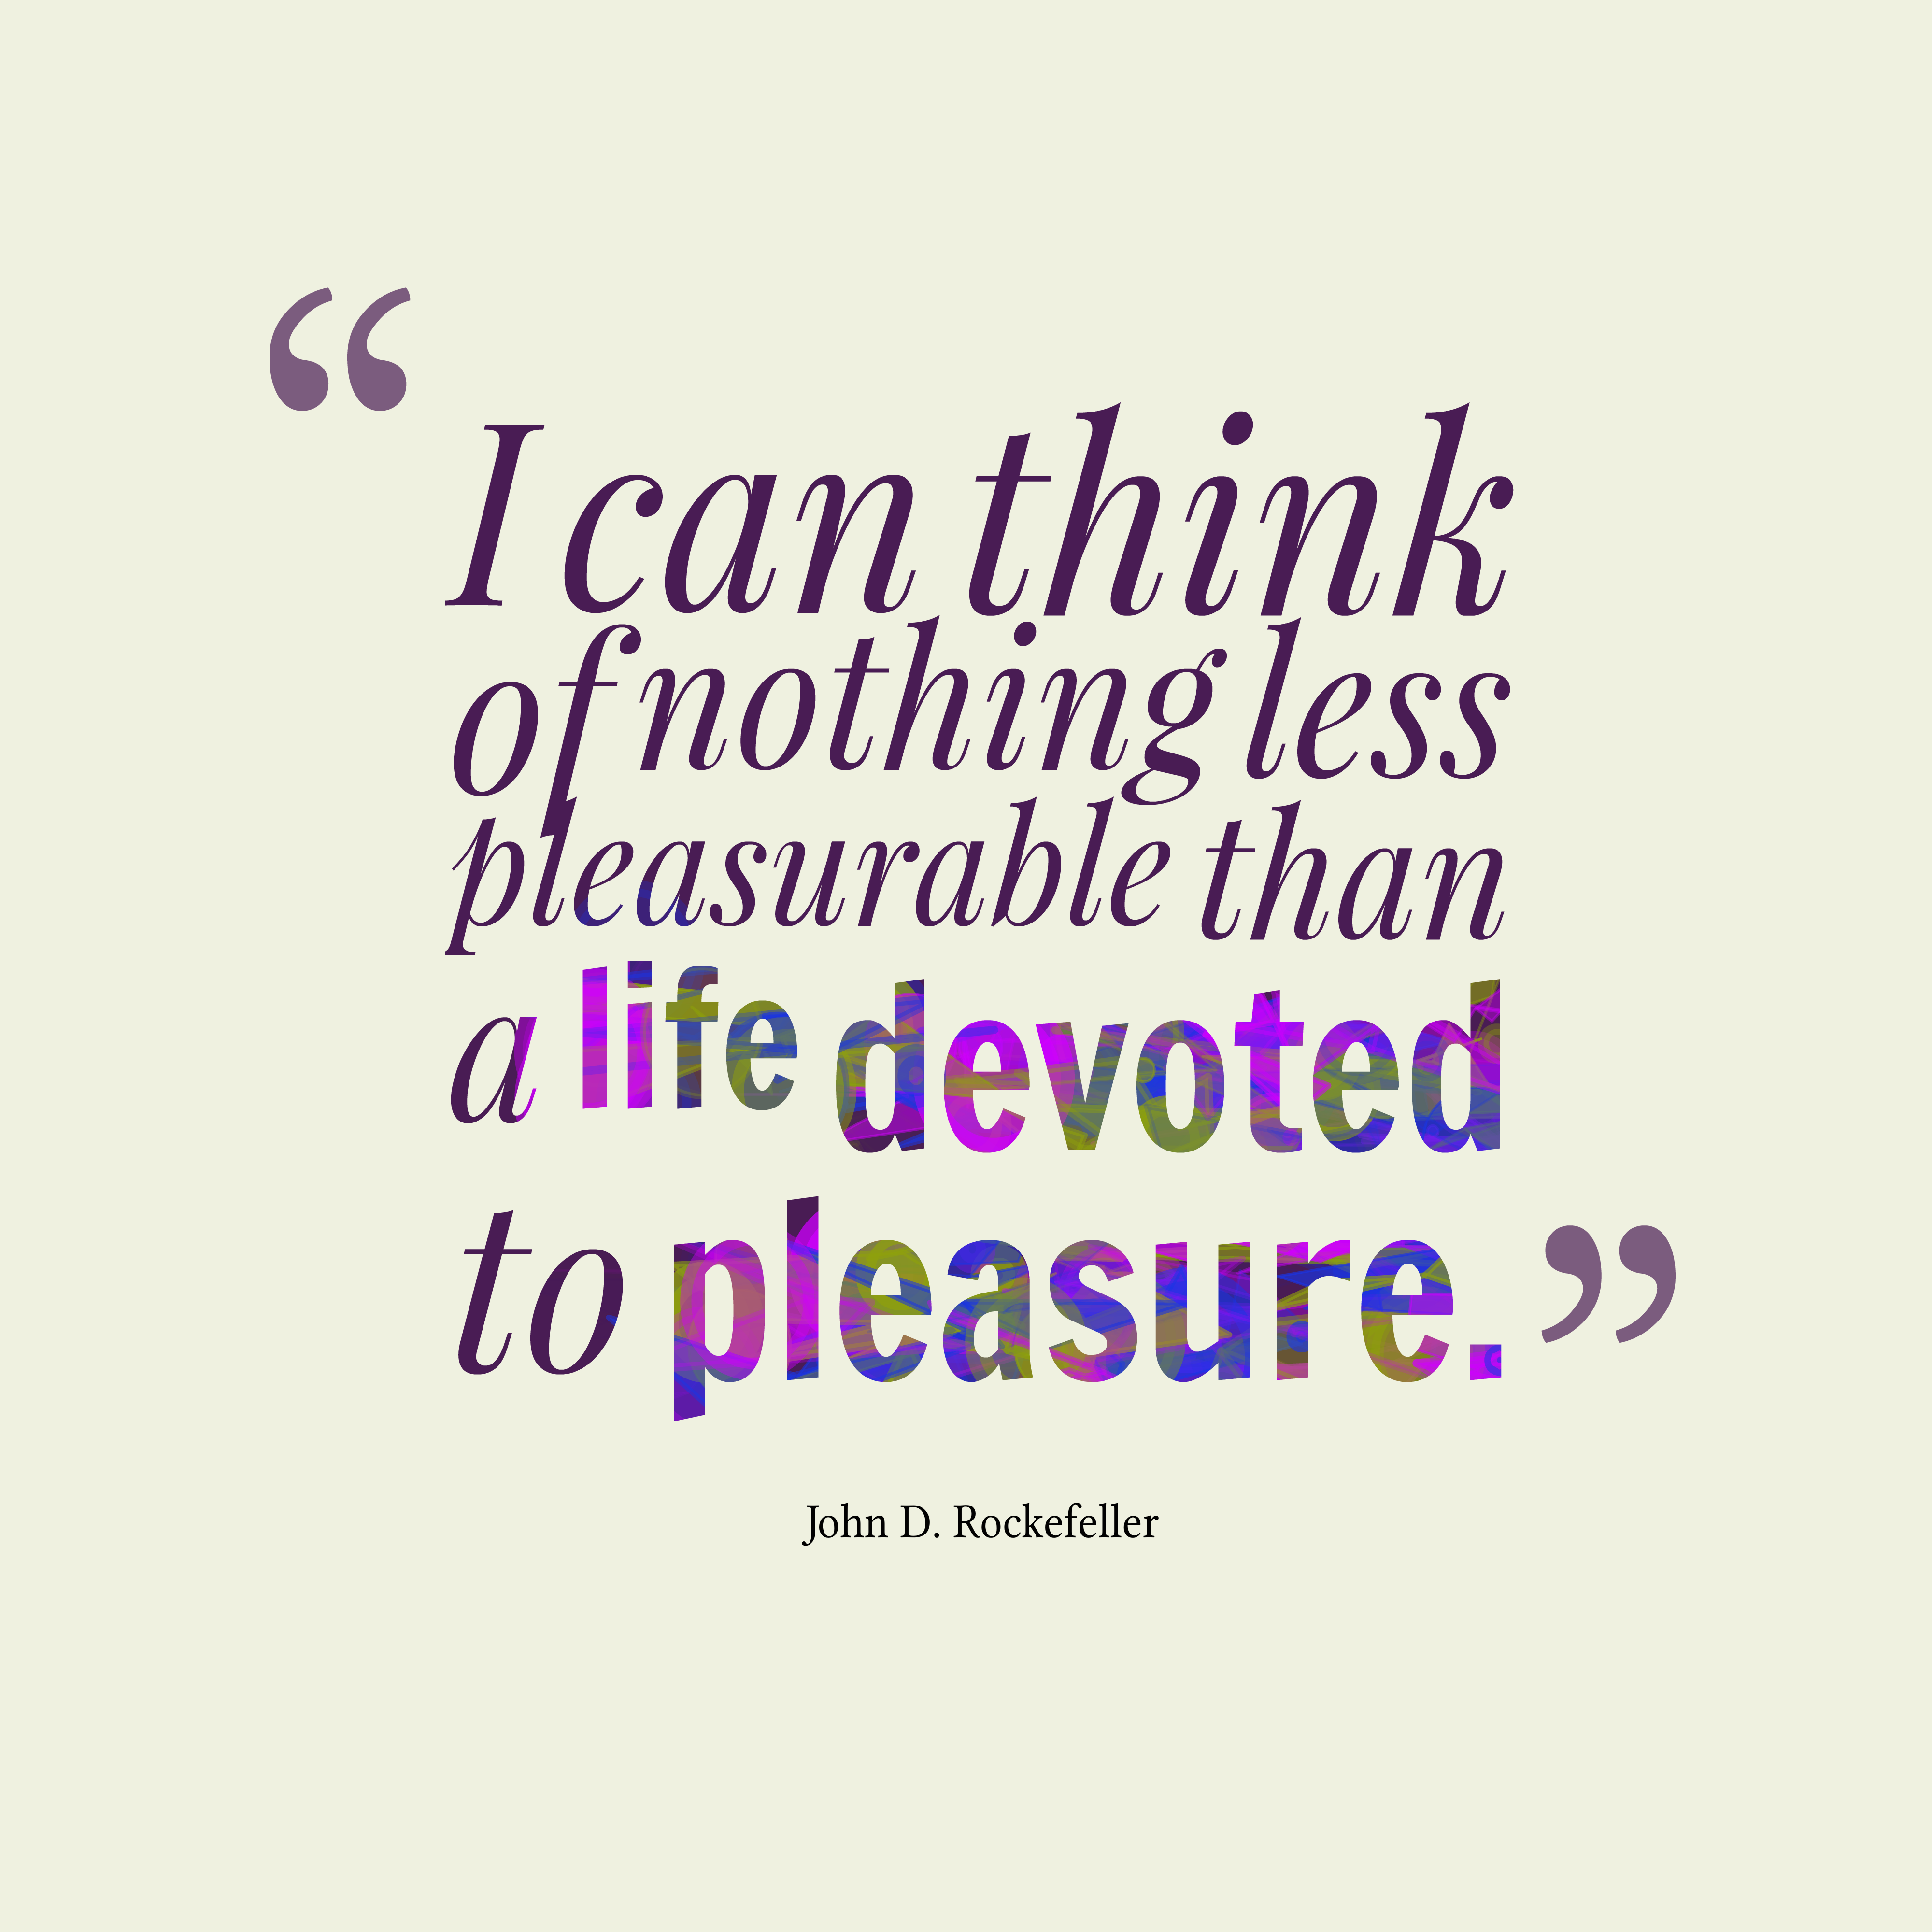 I can think of nothing less pleasurable than a life devoted to pleasure. John D. Rockefeller